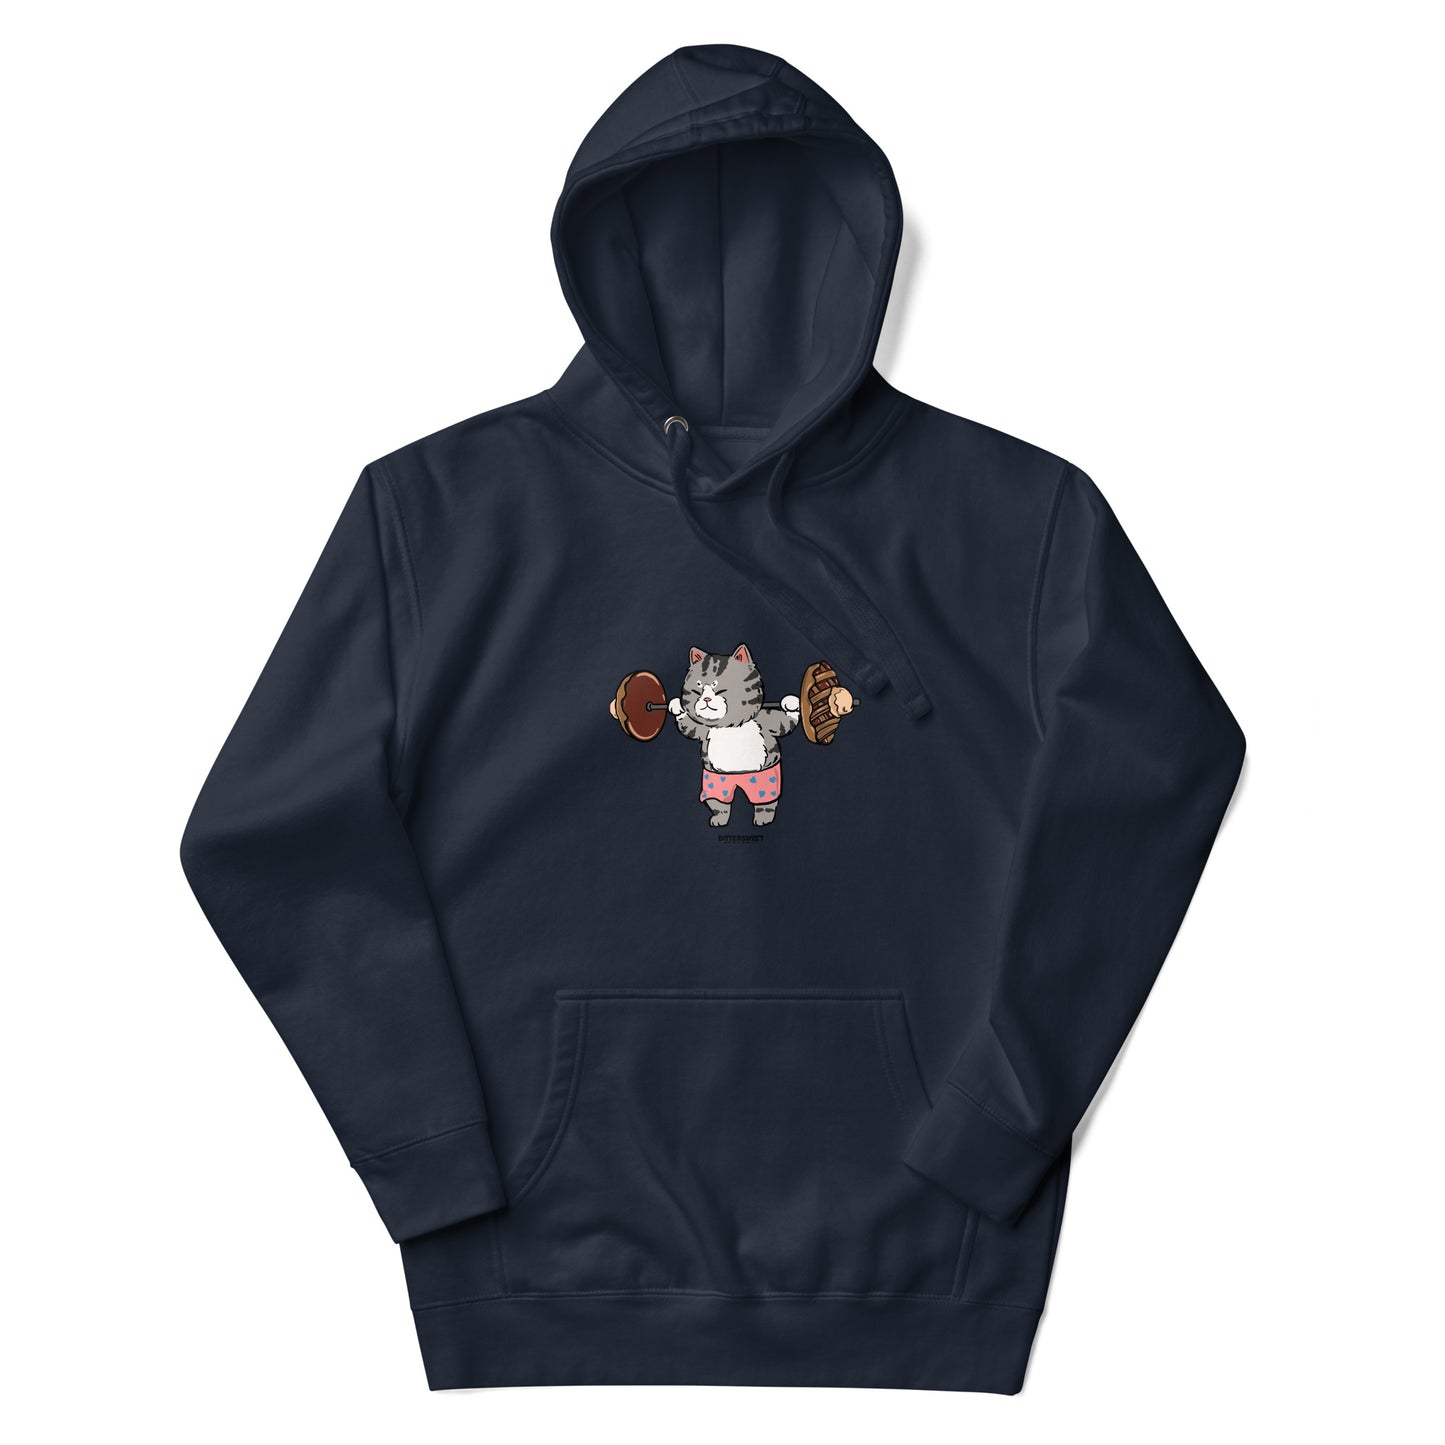 Funny cat graphic heavyweight Gym Hoodie